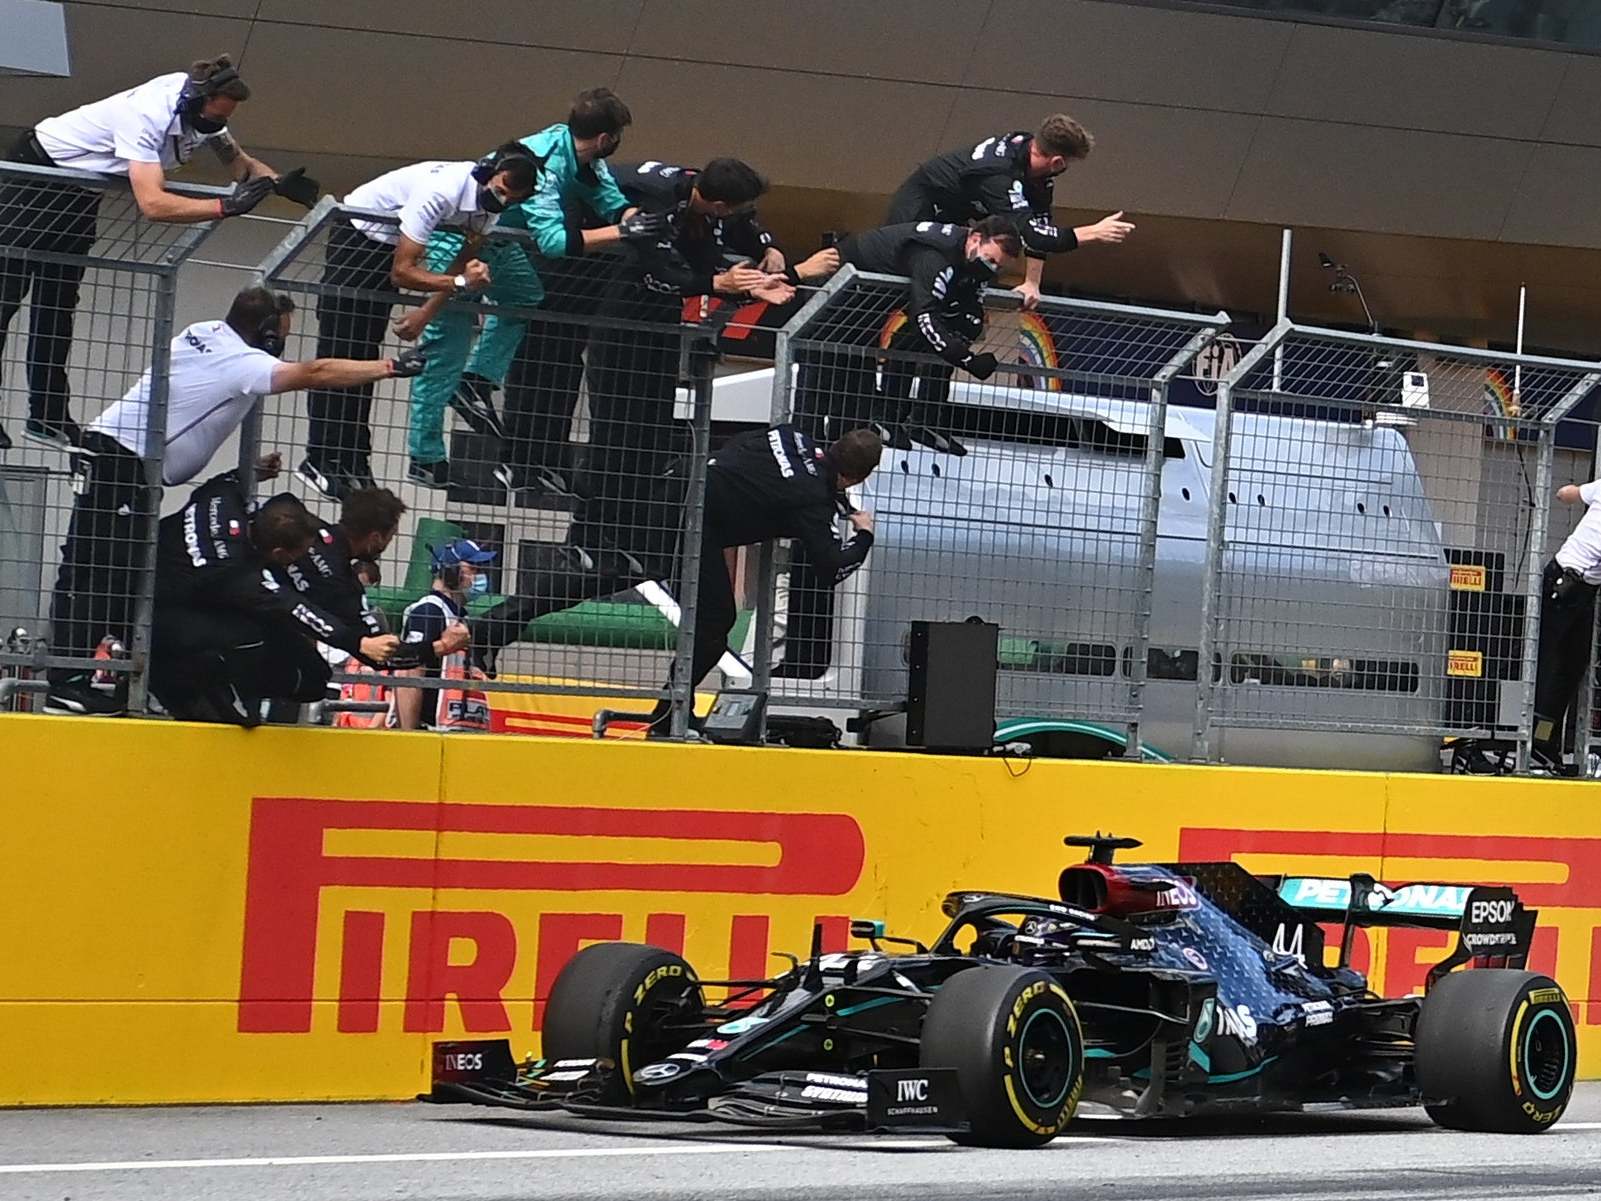 Mercedes have shown all the signs of another season of domination